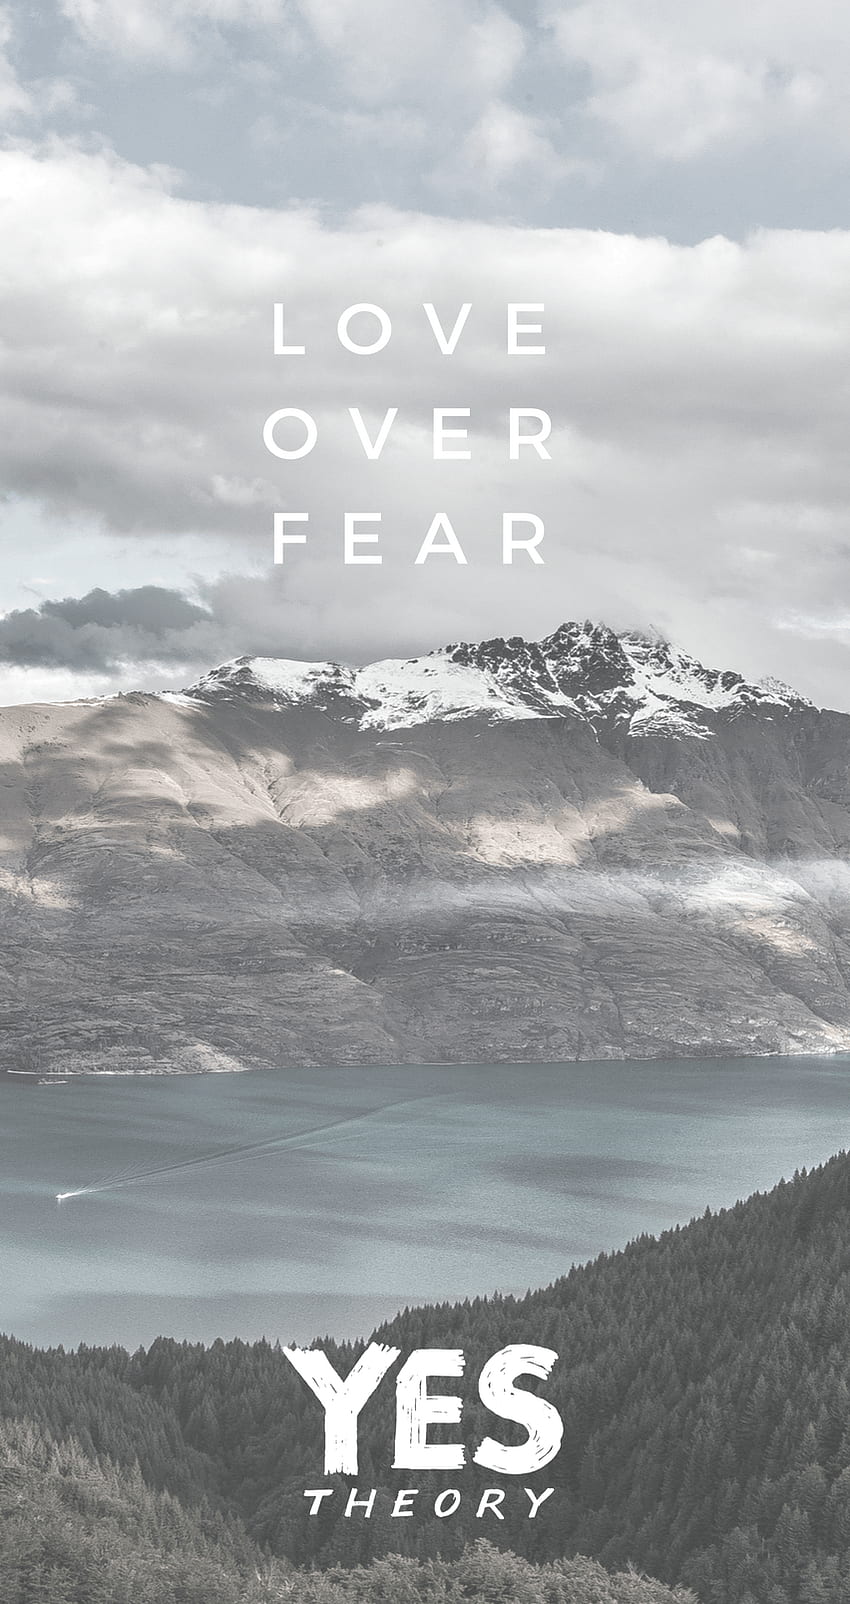 Yes Theory “Love Over Fear” Phone . iPhone quotes love, Phone quotes, quotes, Seek Discomfort HD phone wallpaper